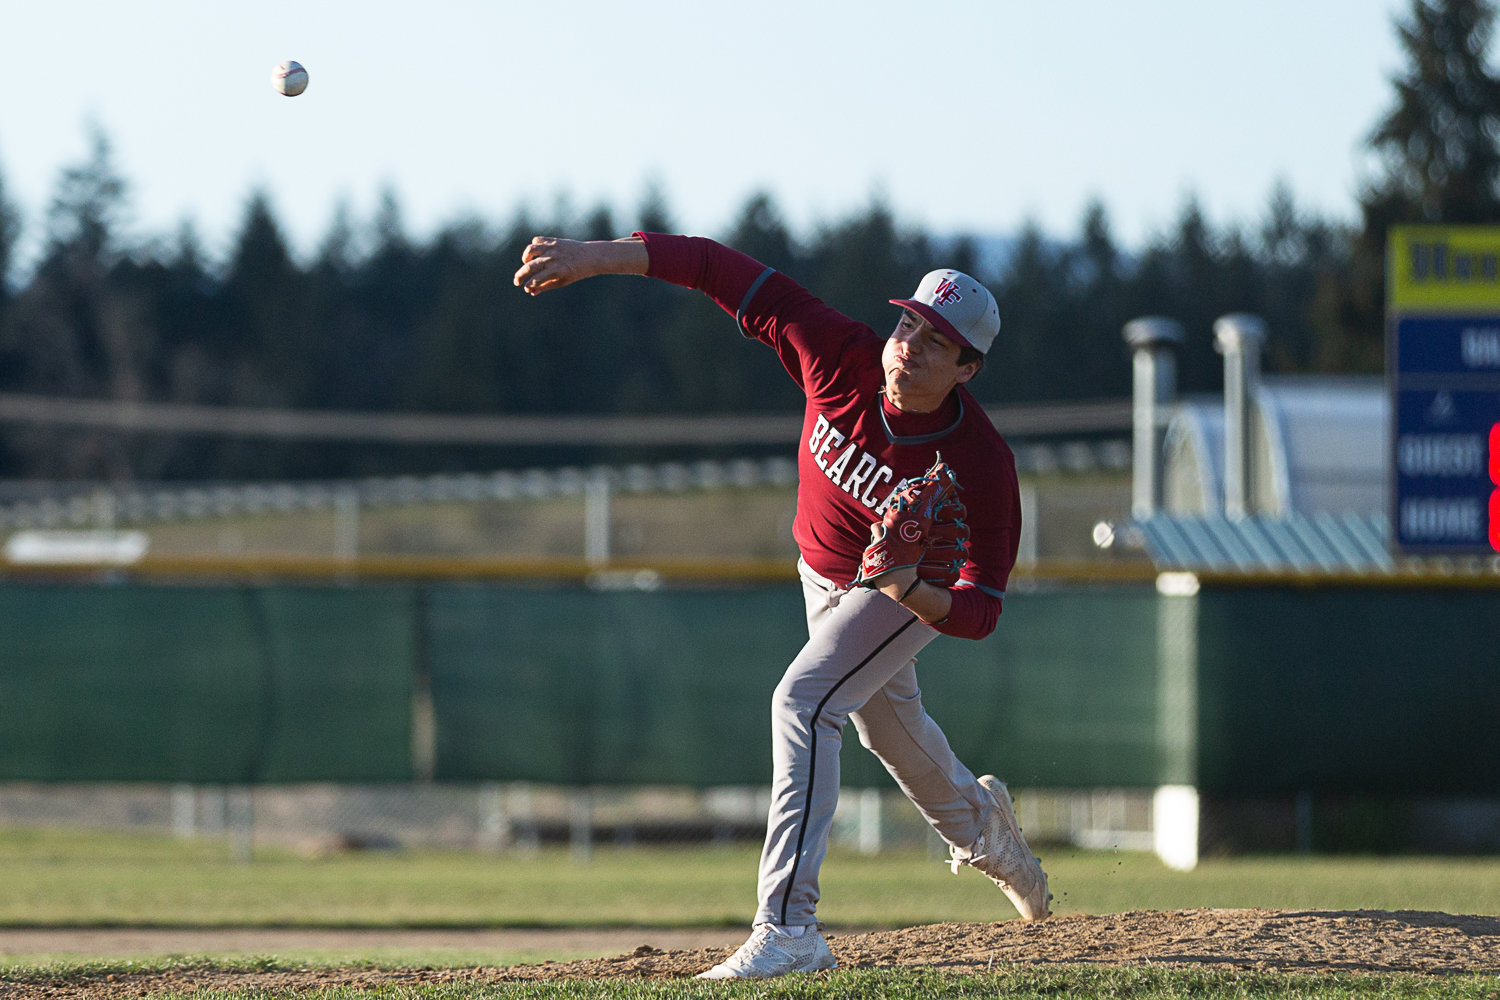 W.F. West pitcher Riggs Westlund throws a pitch against Rochester at Heinz-Rotter Field March 21.